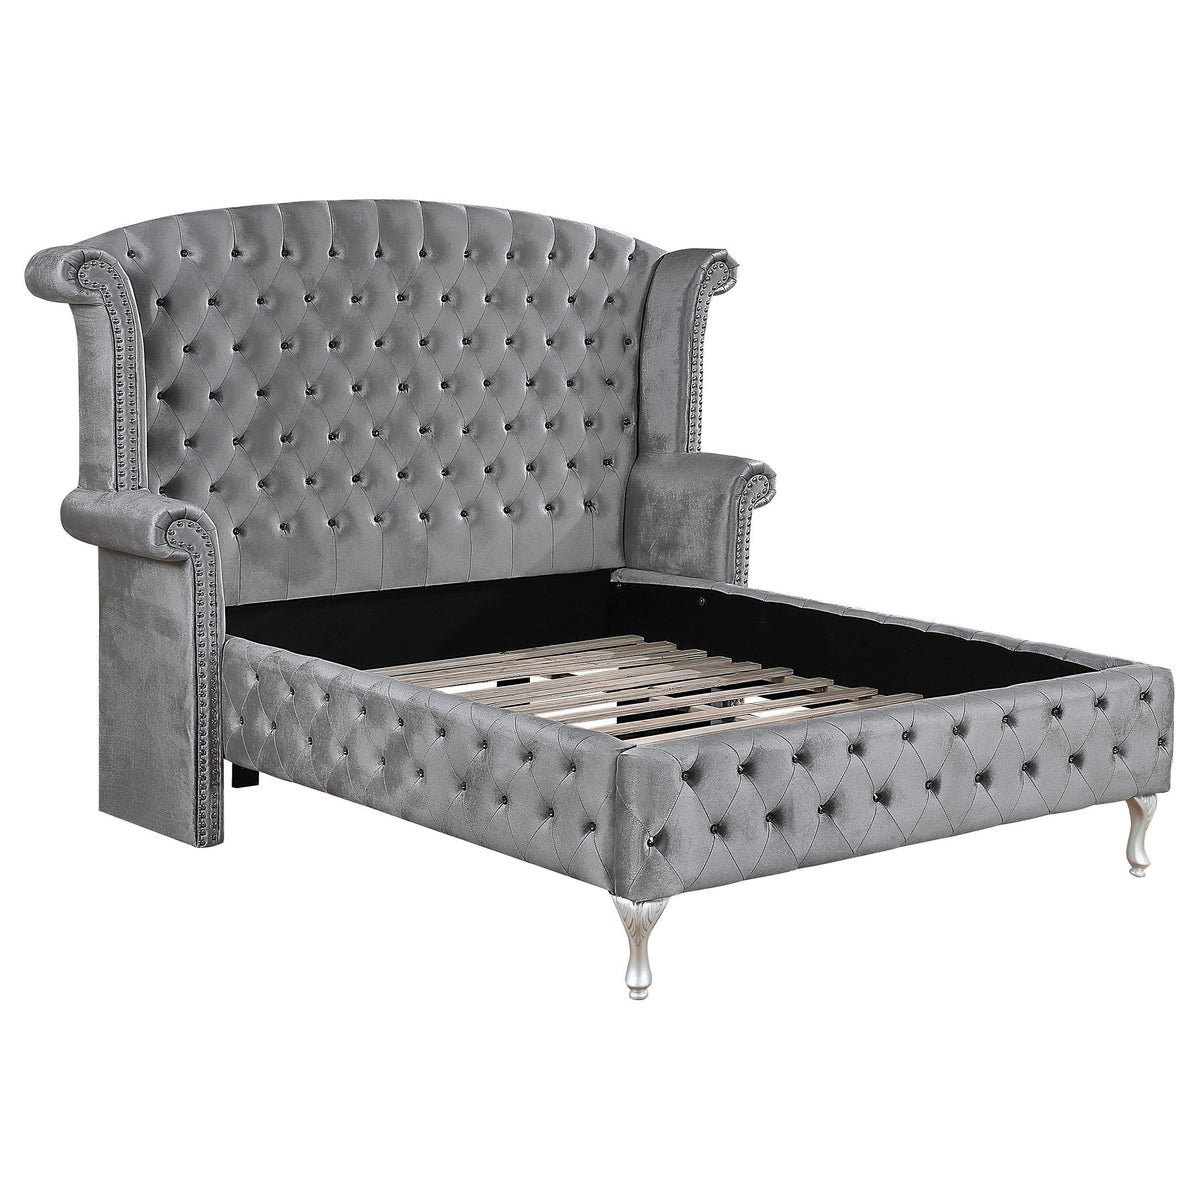 Deanna Queen Tufted Upholstered Bed Grey  Half Price Furniture